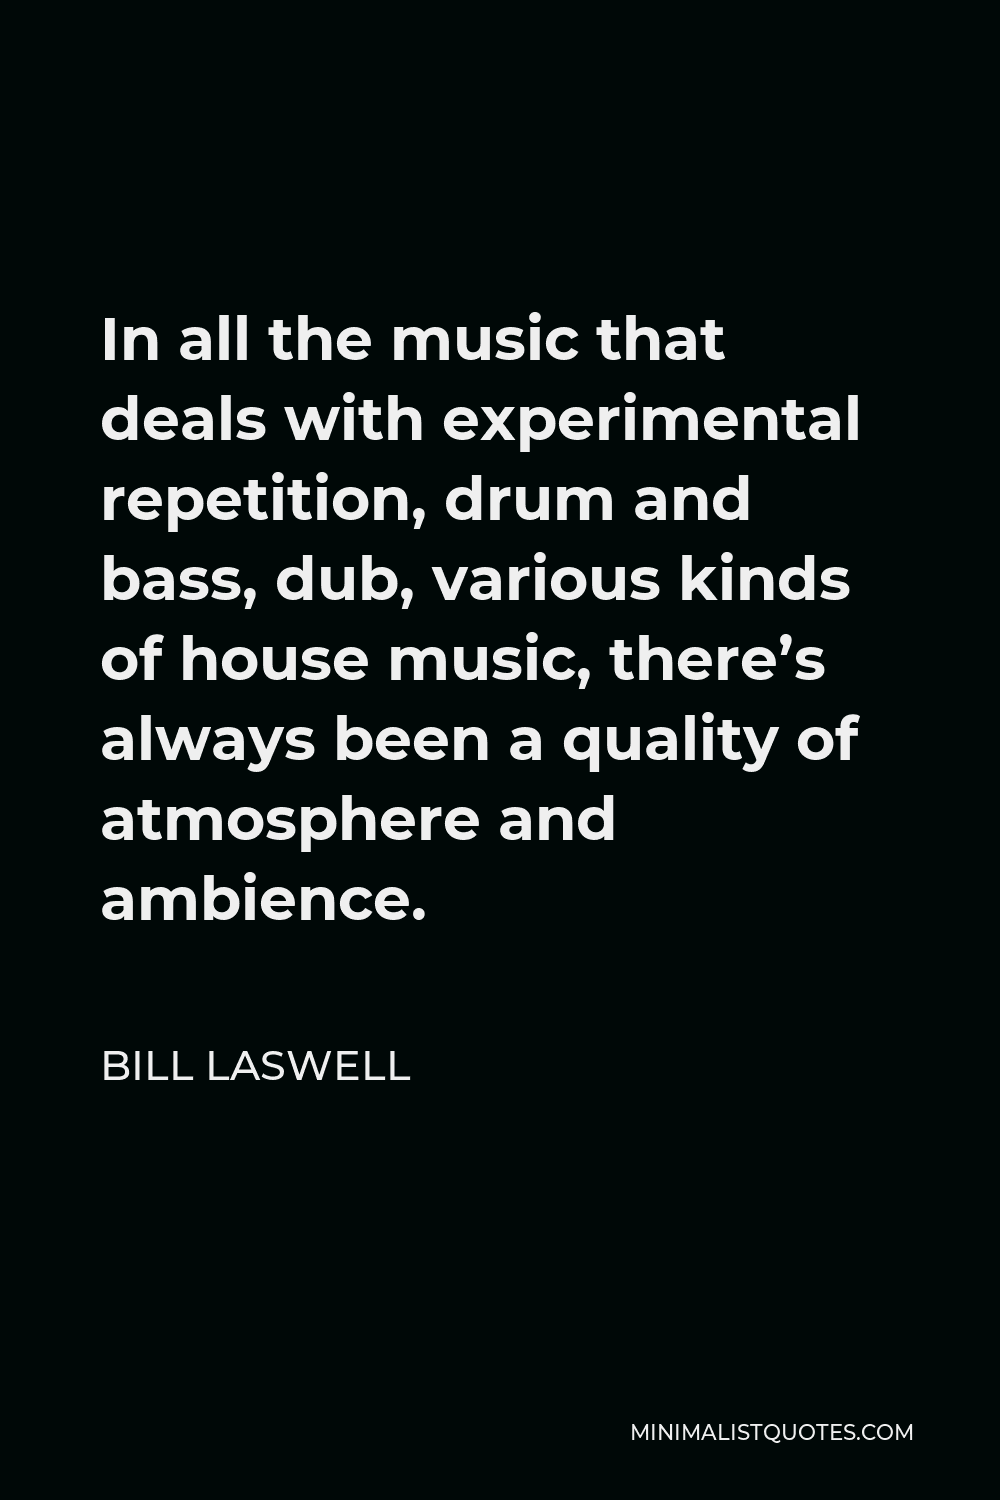 Bill Laswell Quote - In all the music that deals with experimental repetition, drum and bass, dub, various kinds of house music, there’s always been a quality of atmosphere and ambience.